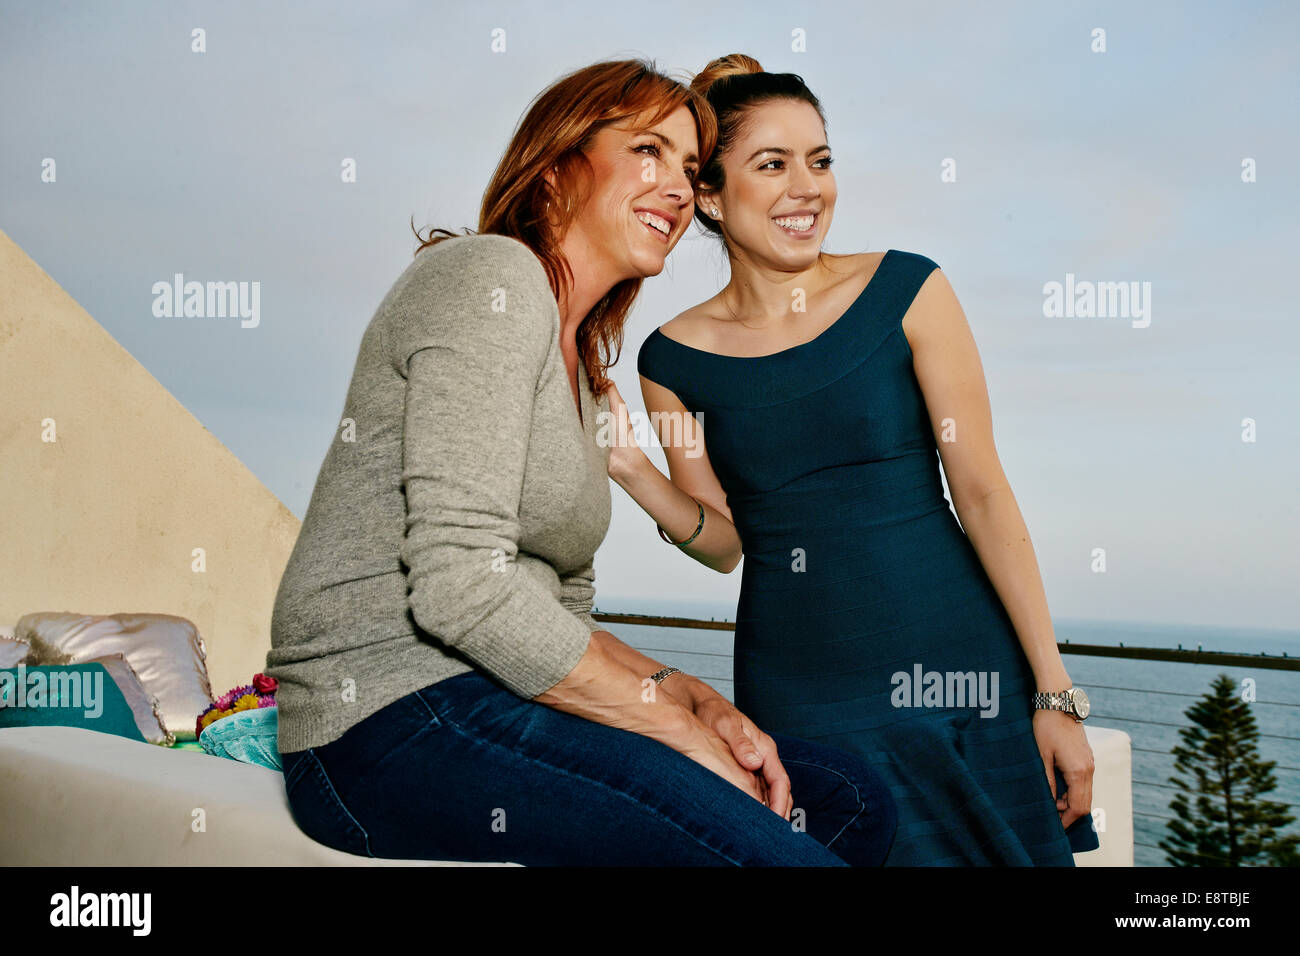 Women relaxing together at waterfront Stock Photo